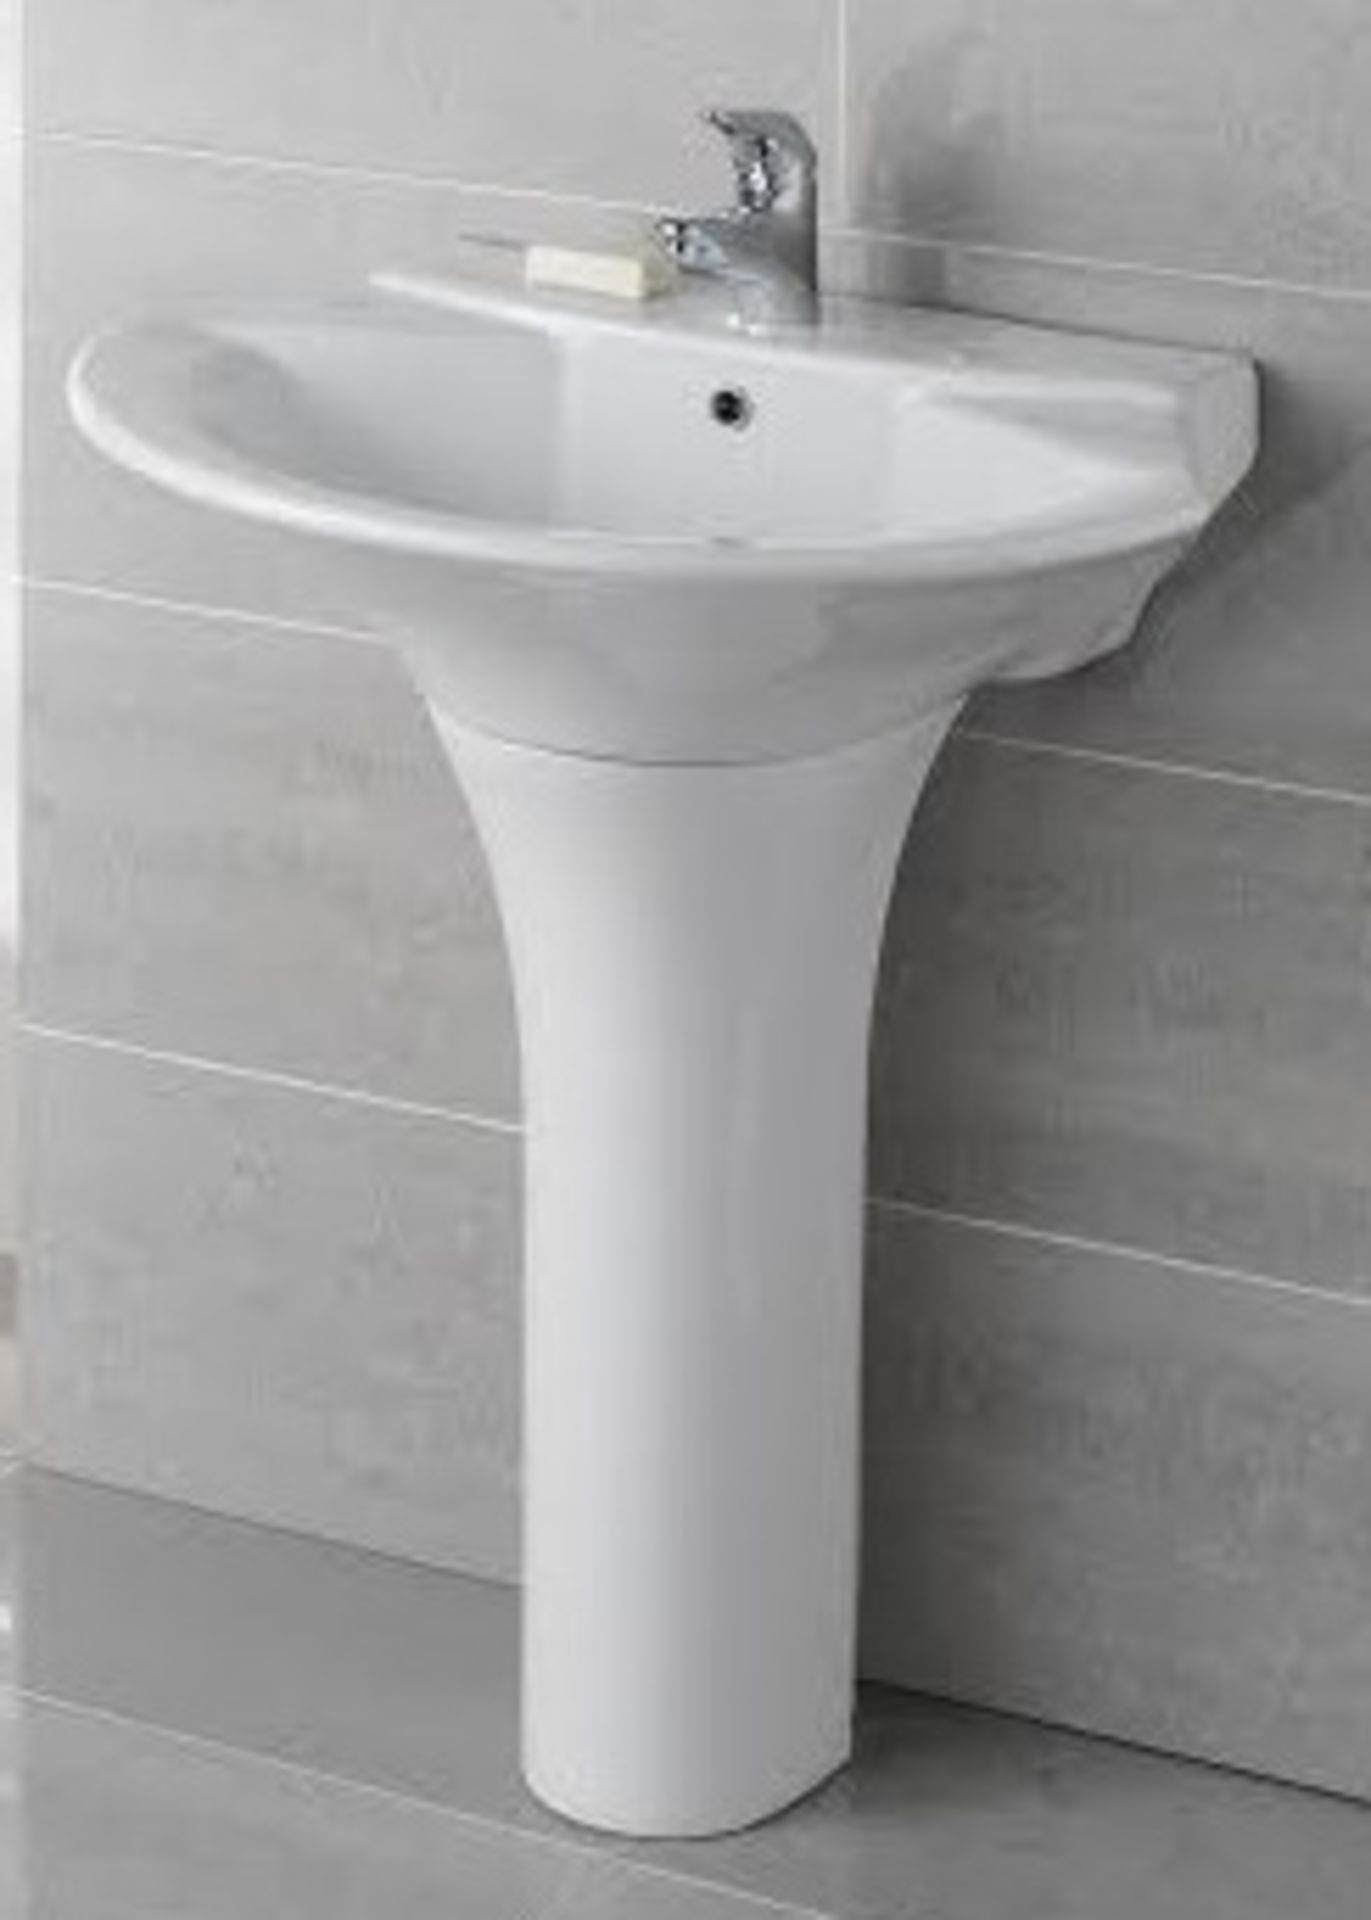 1 x Vogue Bathrooms CLARA Single Tap Hole SINK BASINS With Pedestals - 600mm Width - Brand New Boxed